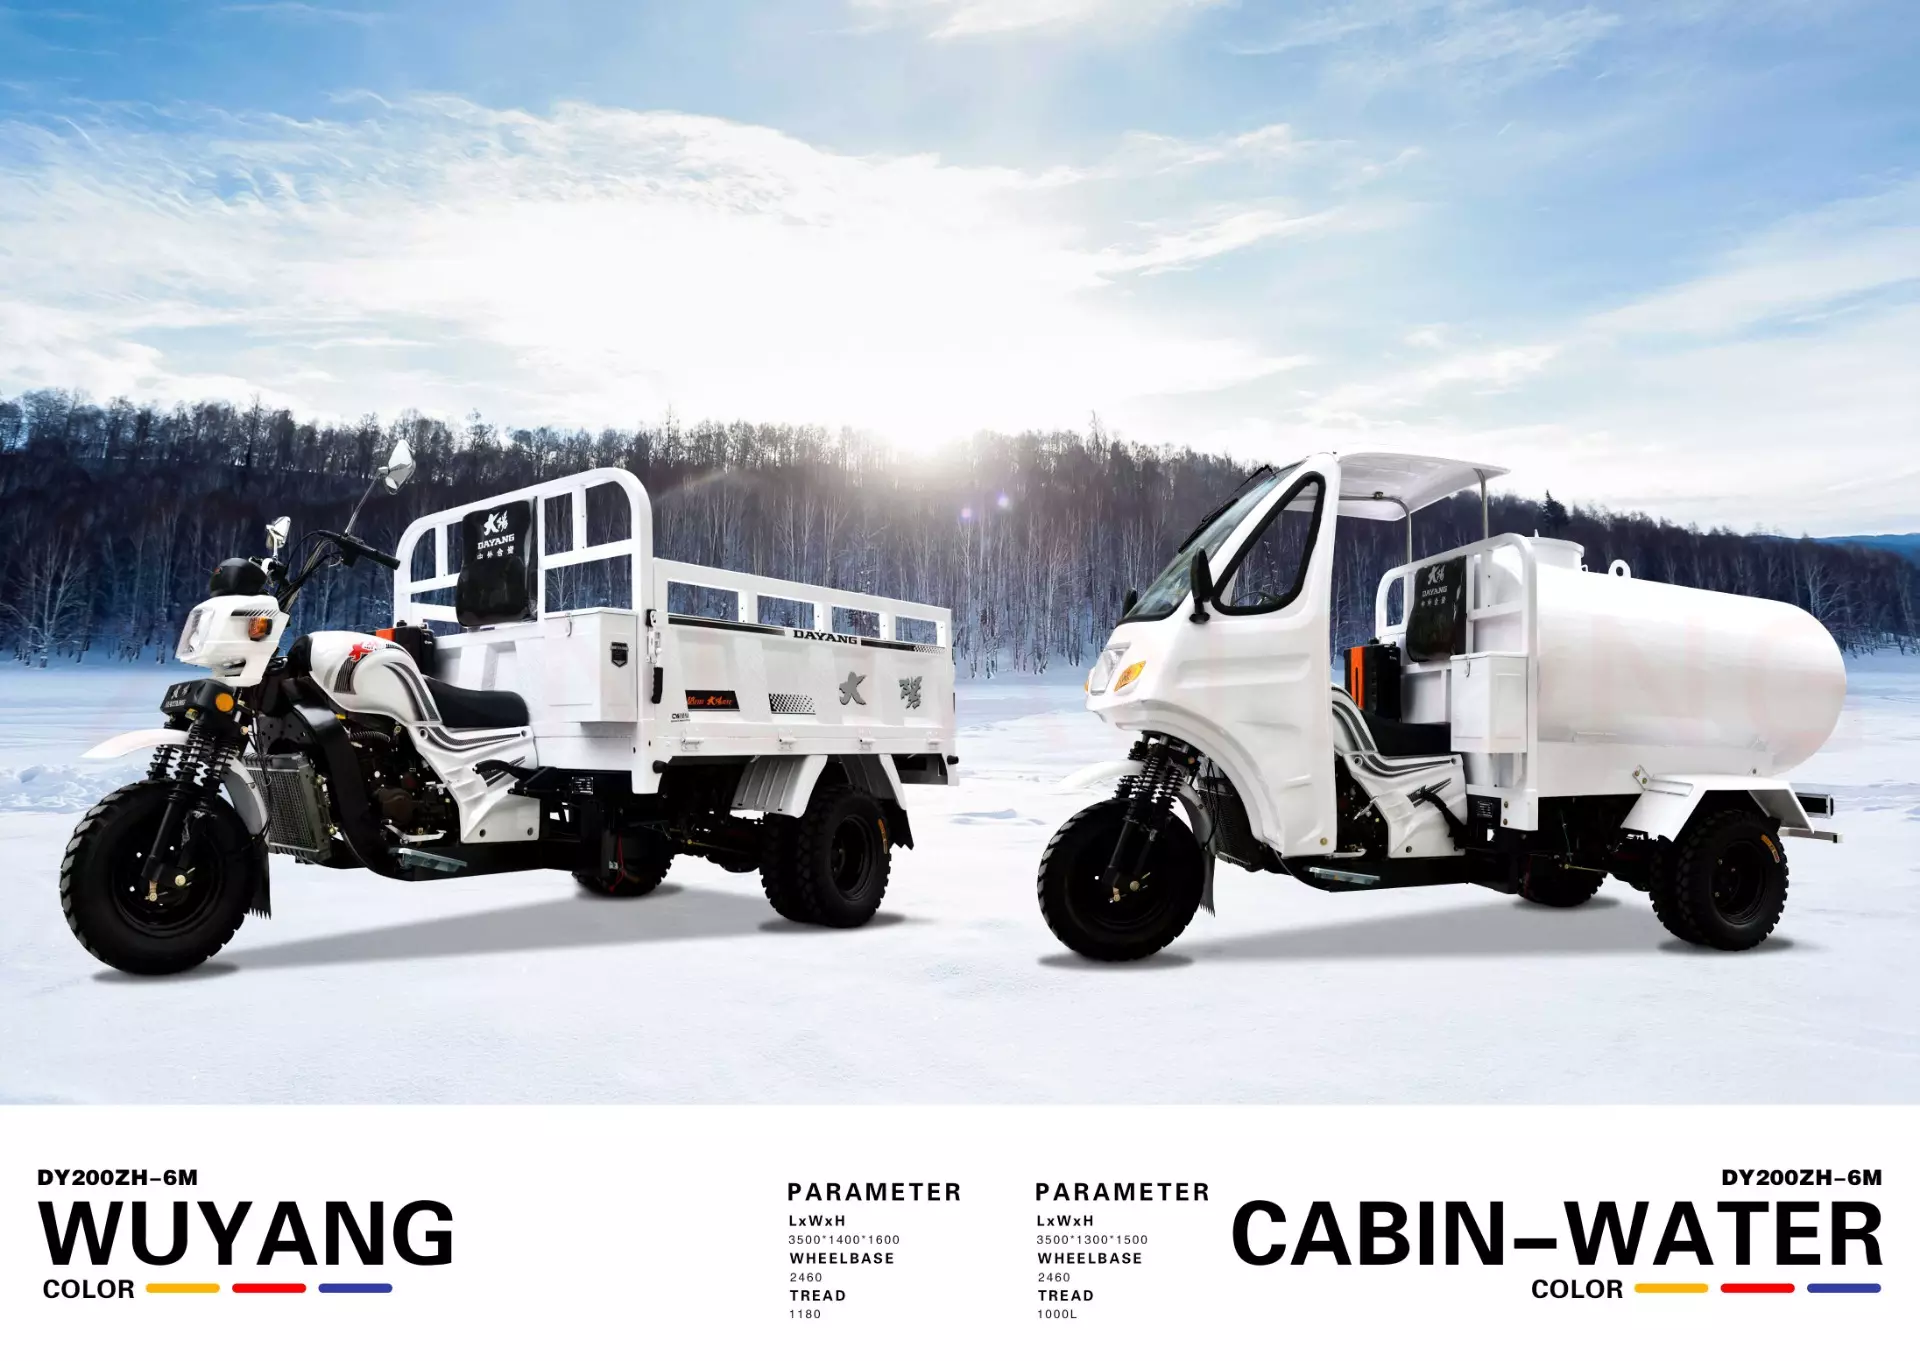 DAYANG new Brand well sell Quality with Green Color Body Power Wheels Origin Type Open Driving Size Product Place Model Load